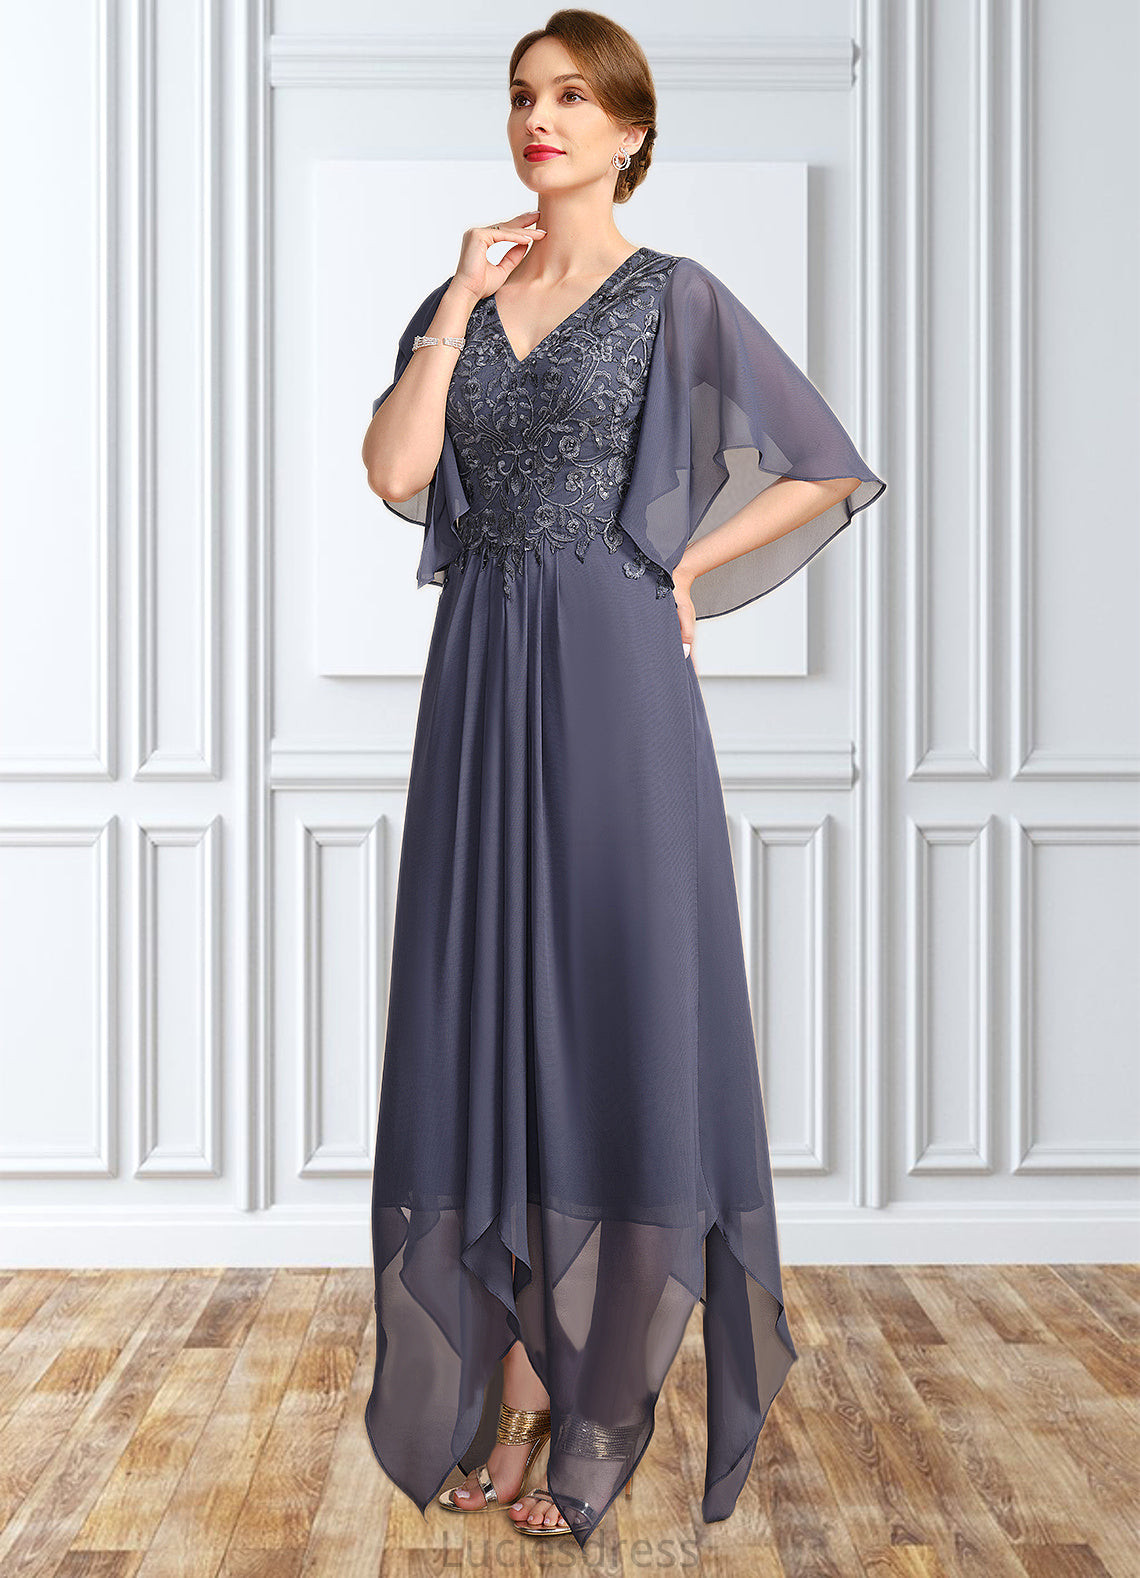 Viola A-line V-Neck Floor-Length Chiffon Lace Mother of the Bride Dress With Sequins HFP0021963